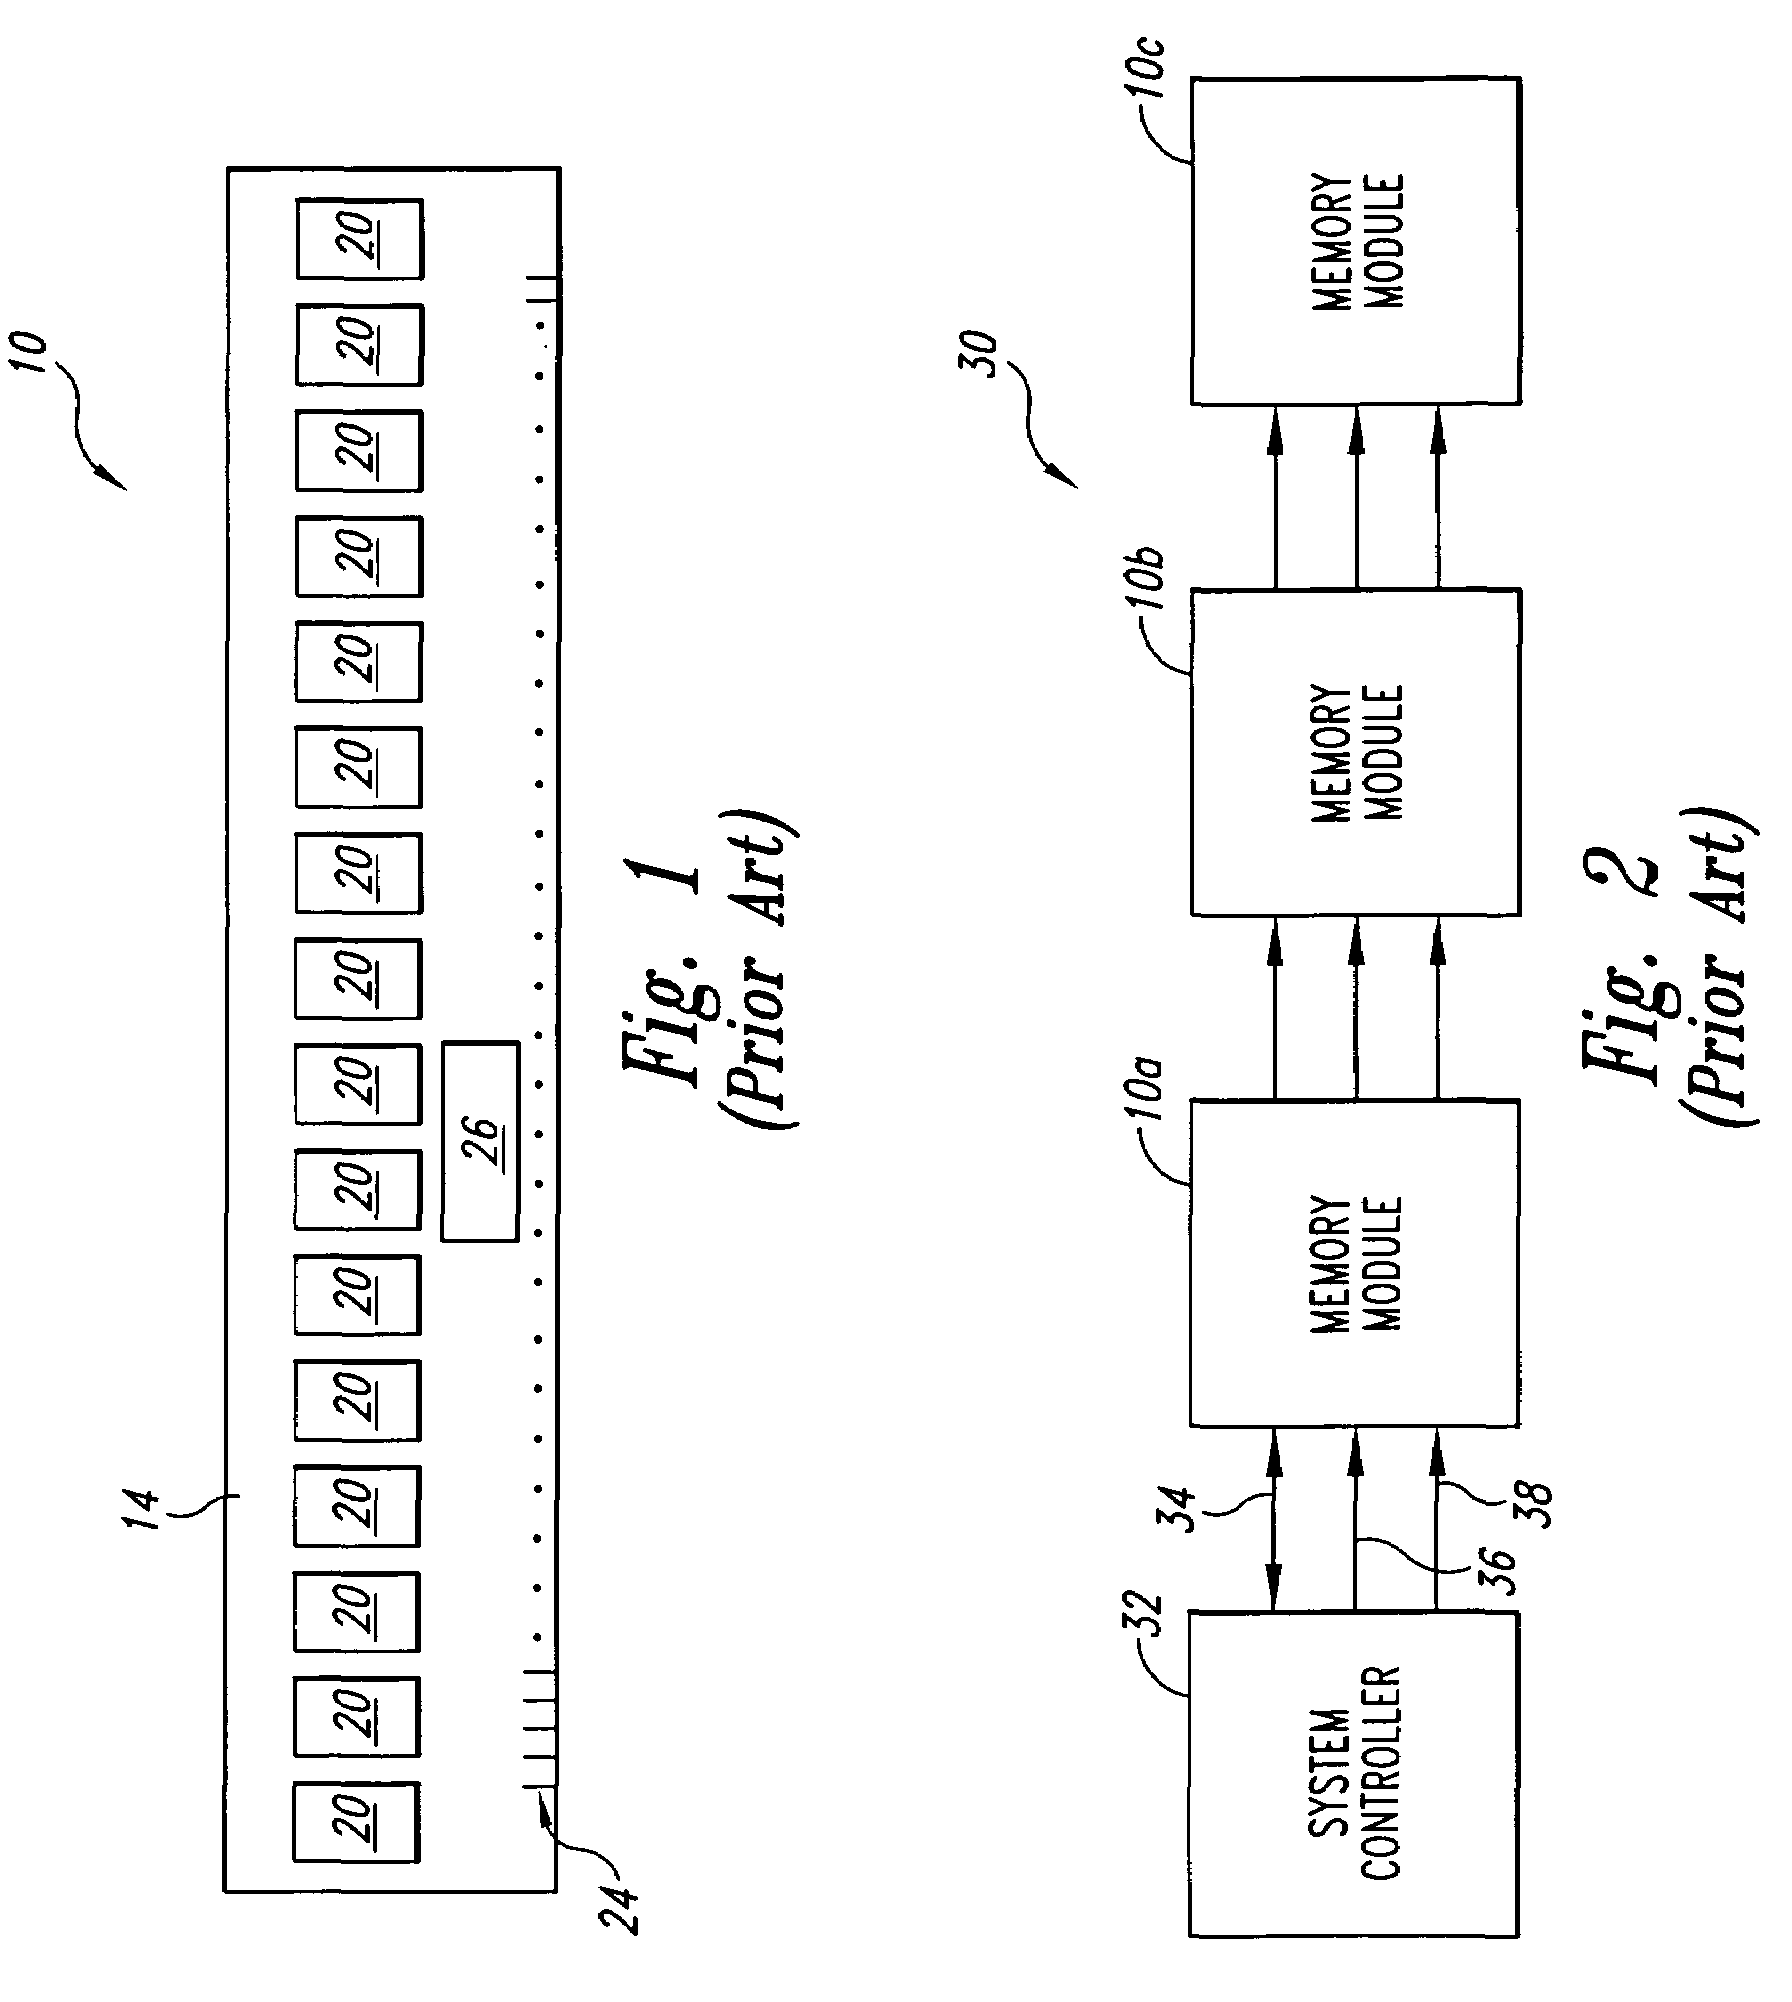 System and method for multiple bit optical data transmission in memory systems